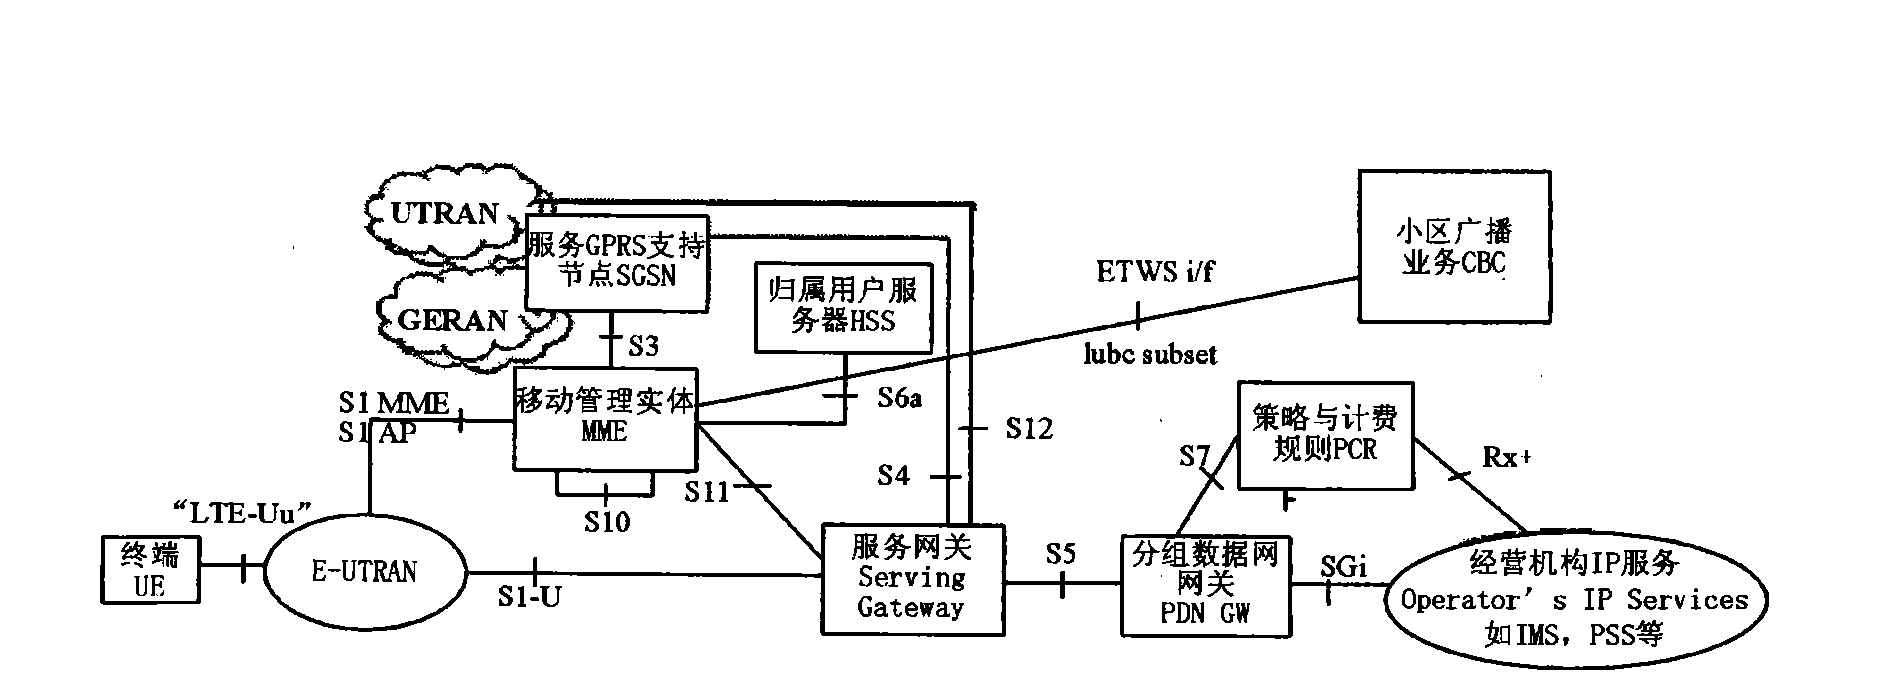 Method for indicating primary notification message of earthquake and tsunami warning system